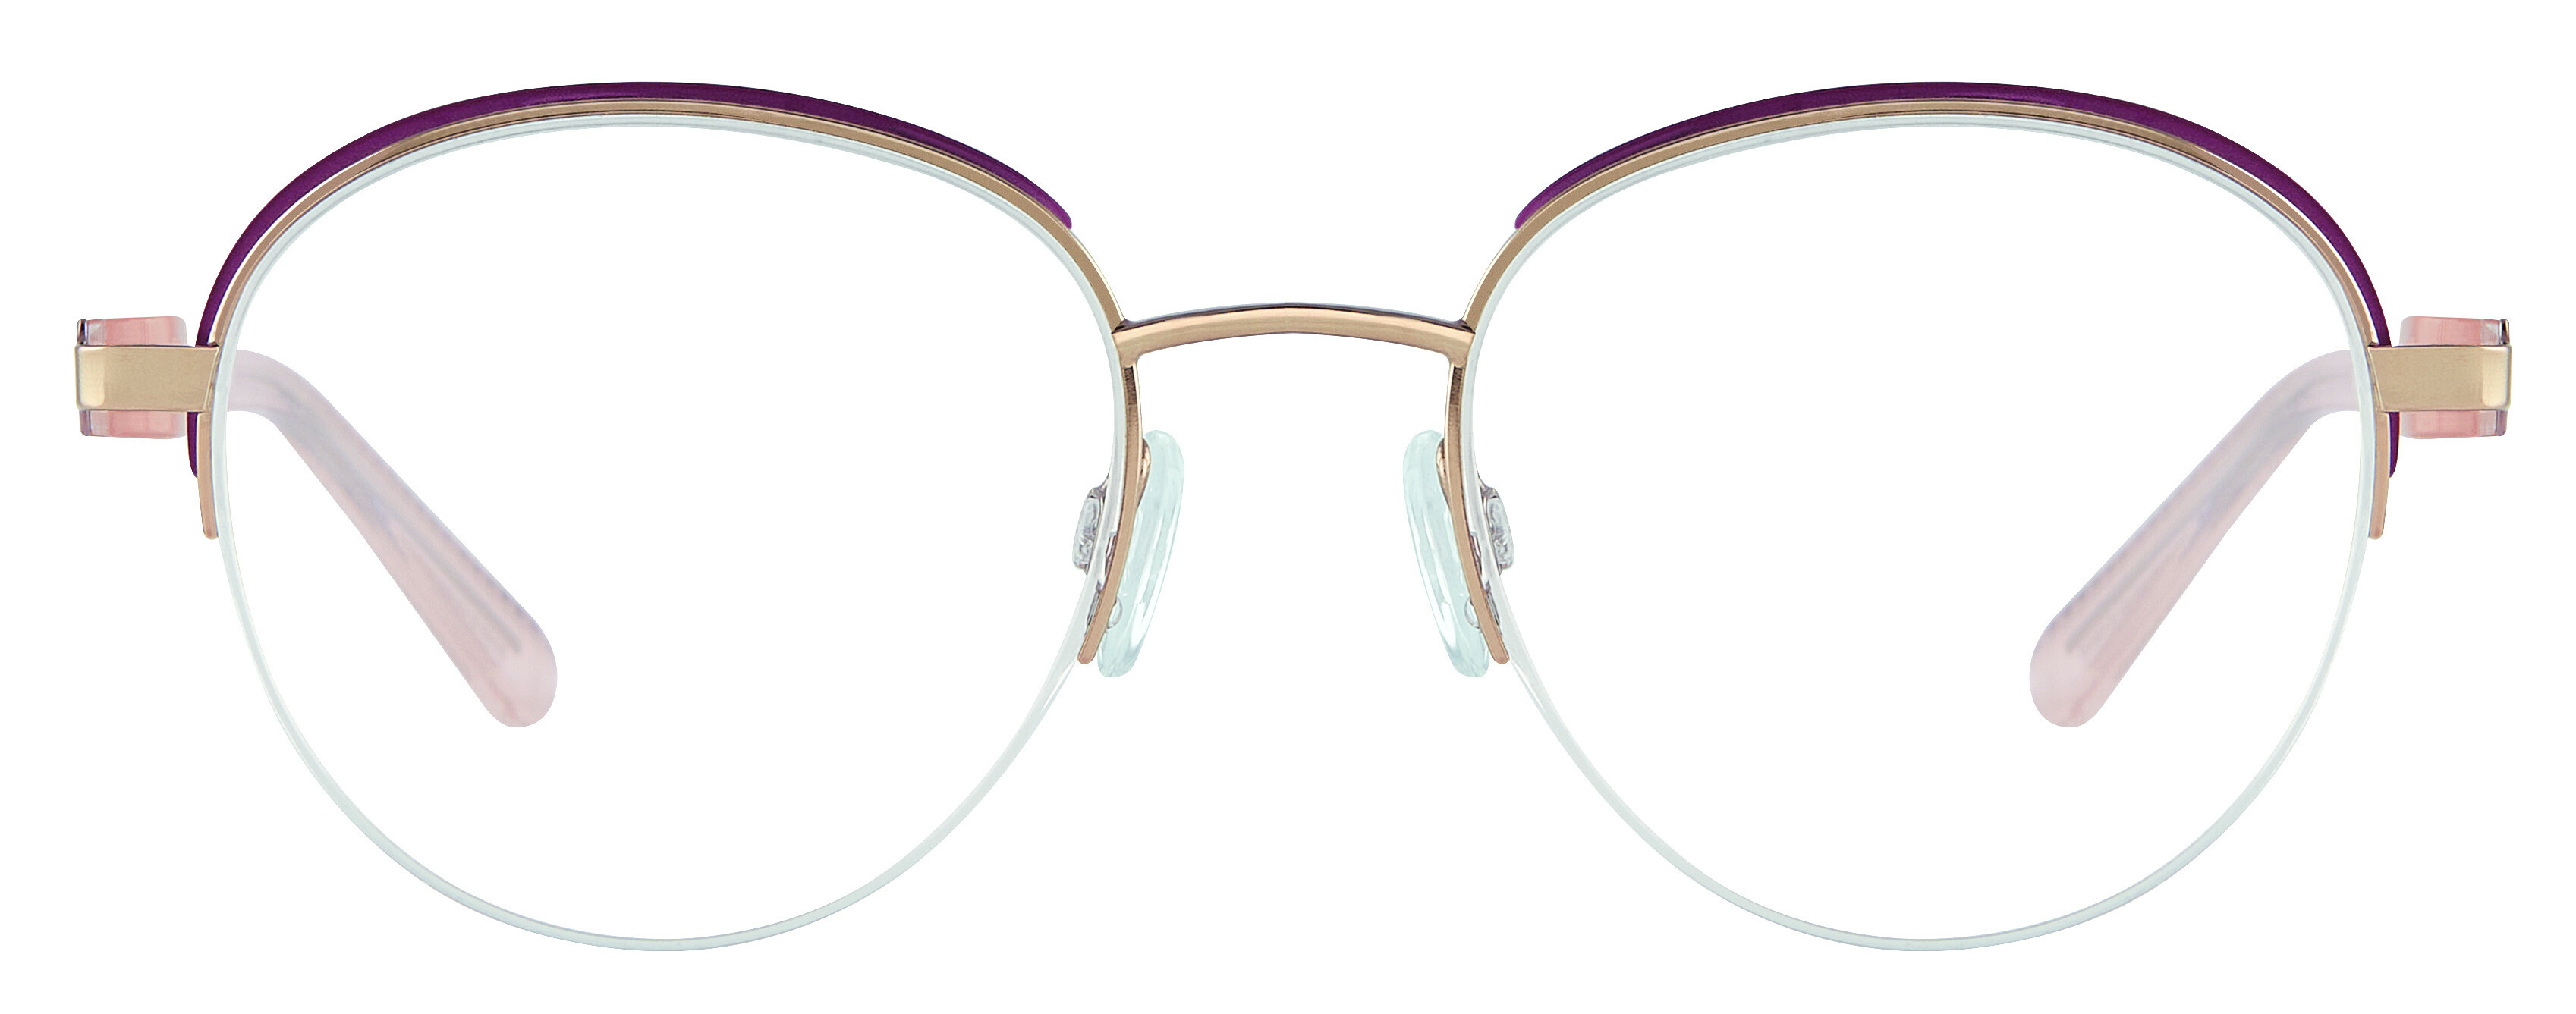 Front ChangeMe! 02642 002 Brille Pink Gold, Lila